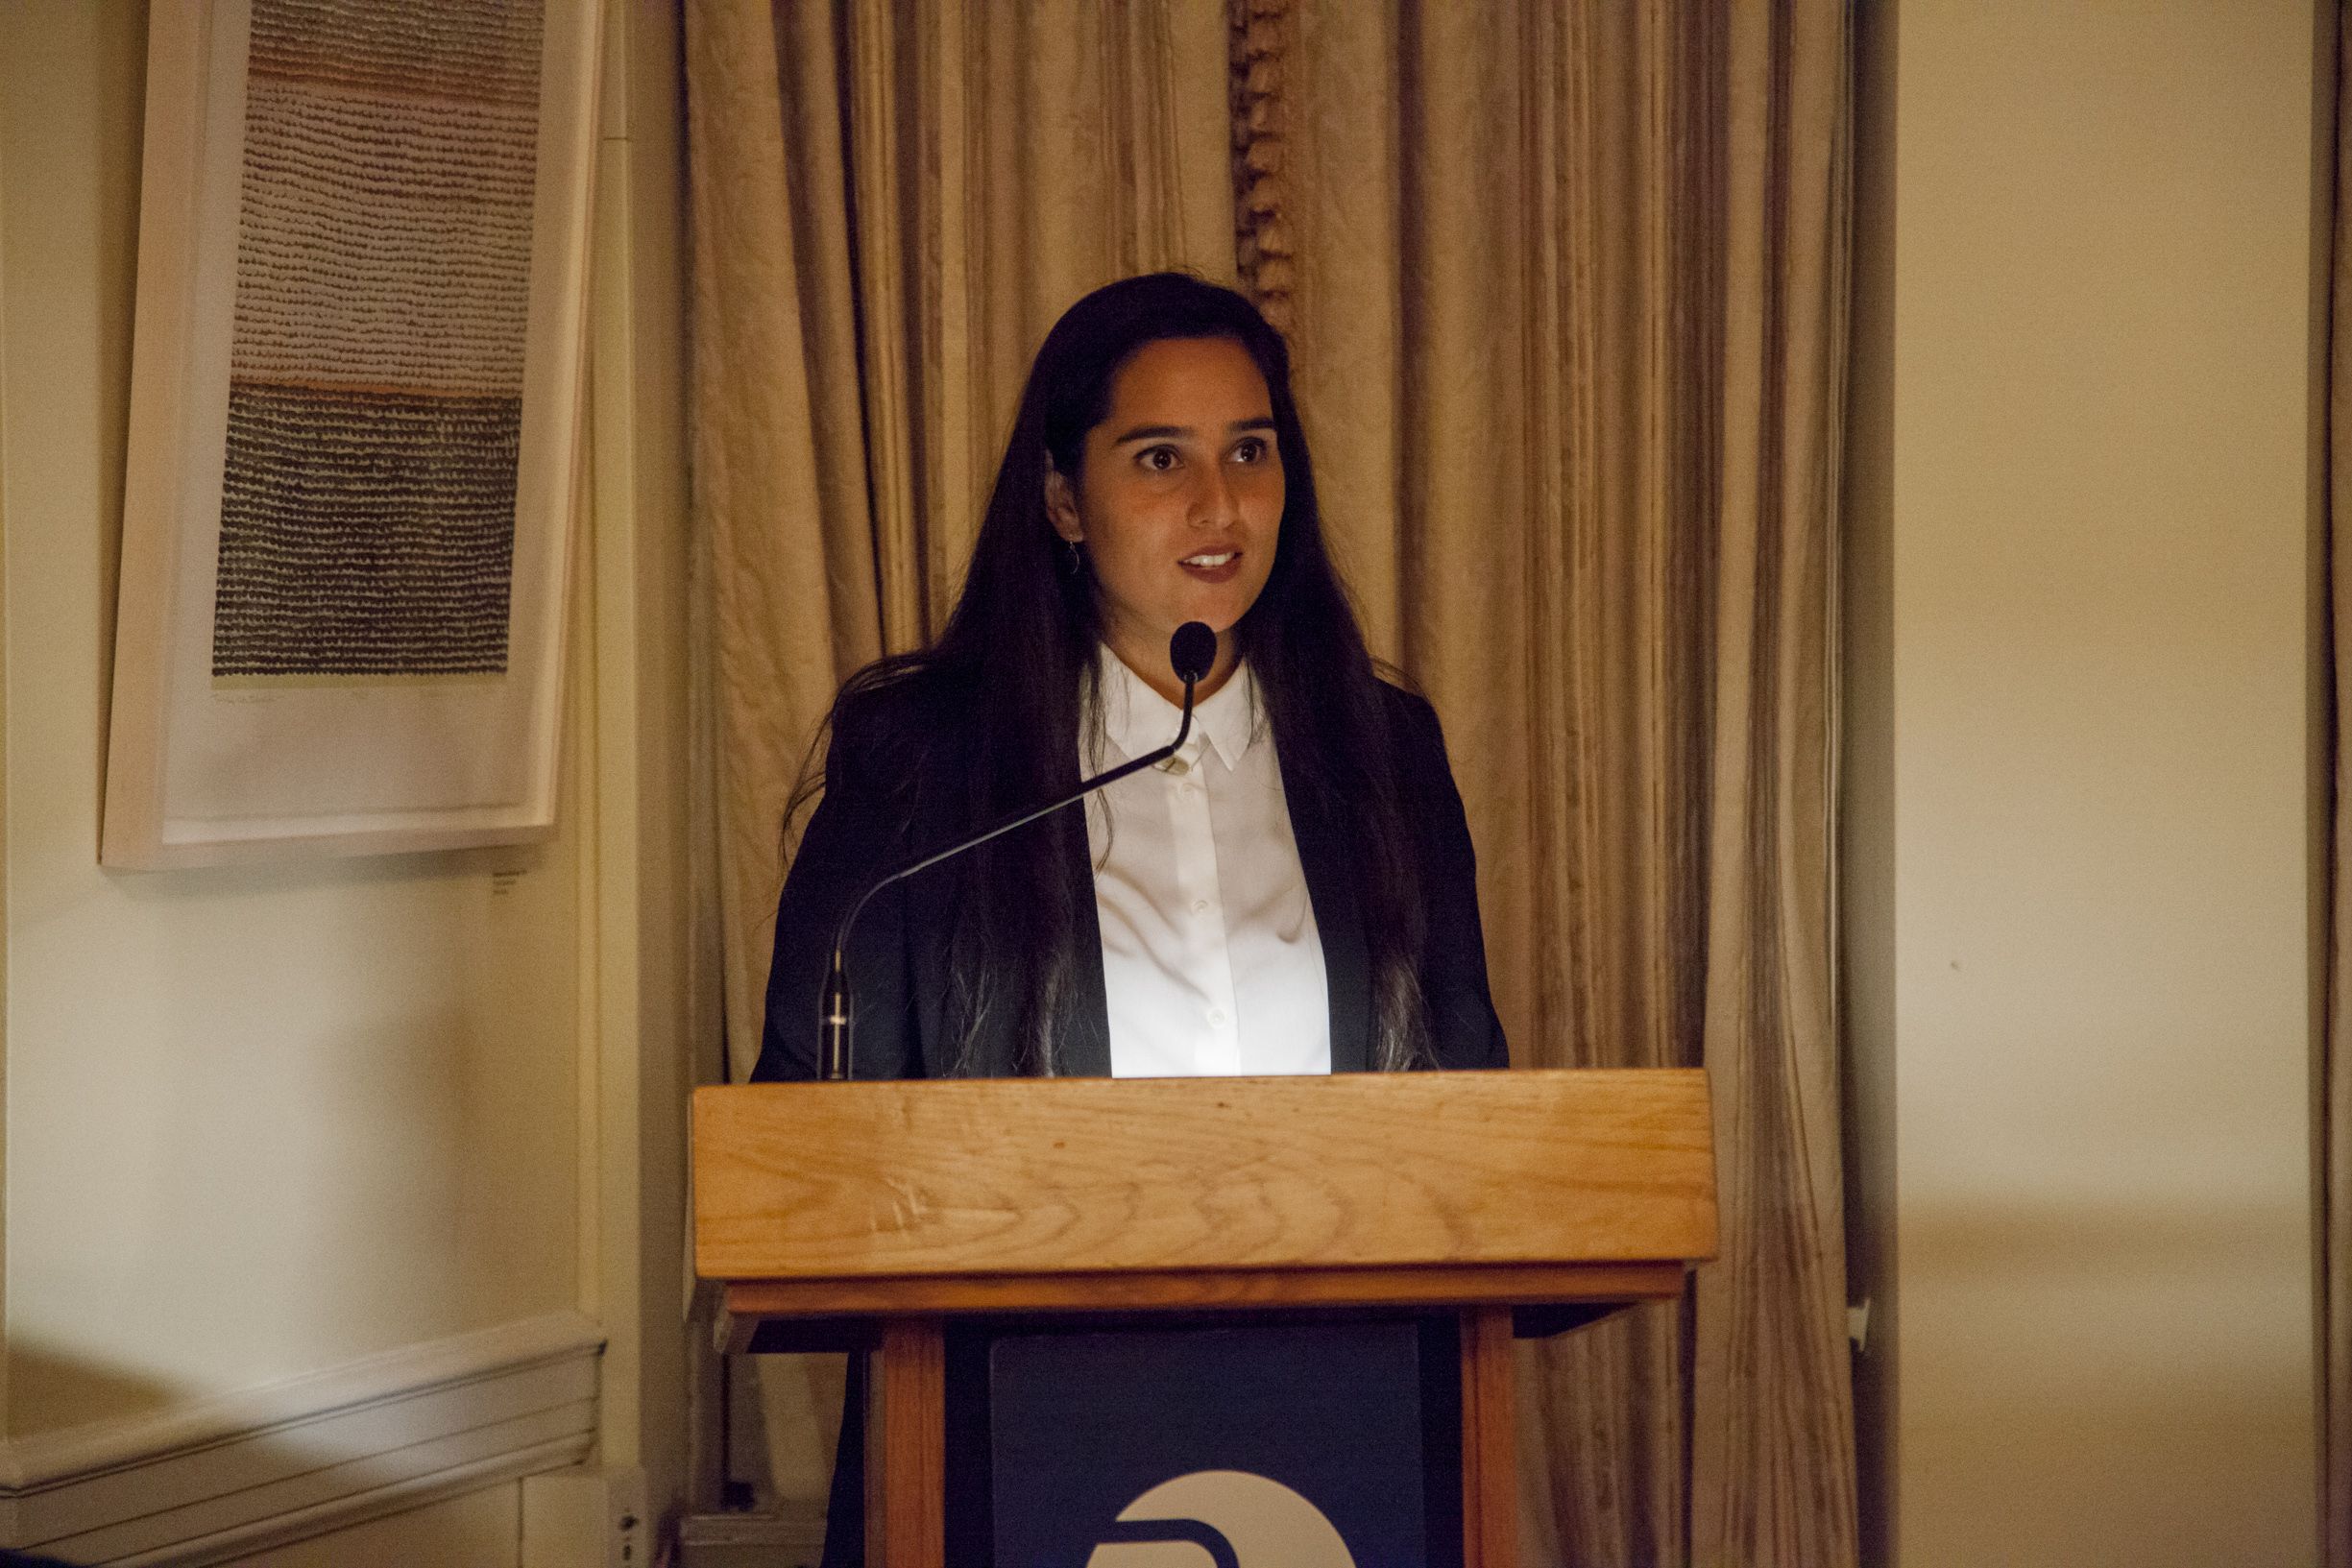 Photojournalist and student fellow alum Meghan Dhaliwal speaks at the evening dinner. Image by Jin Ding. United States, 2018.